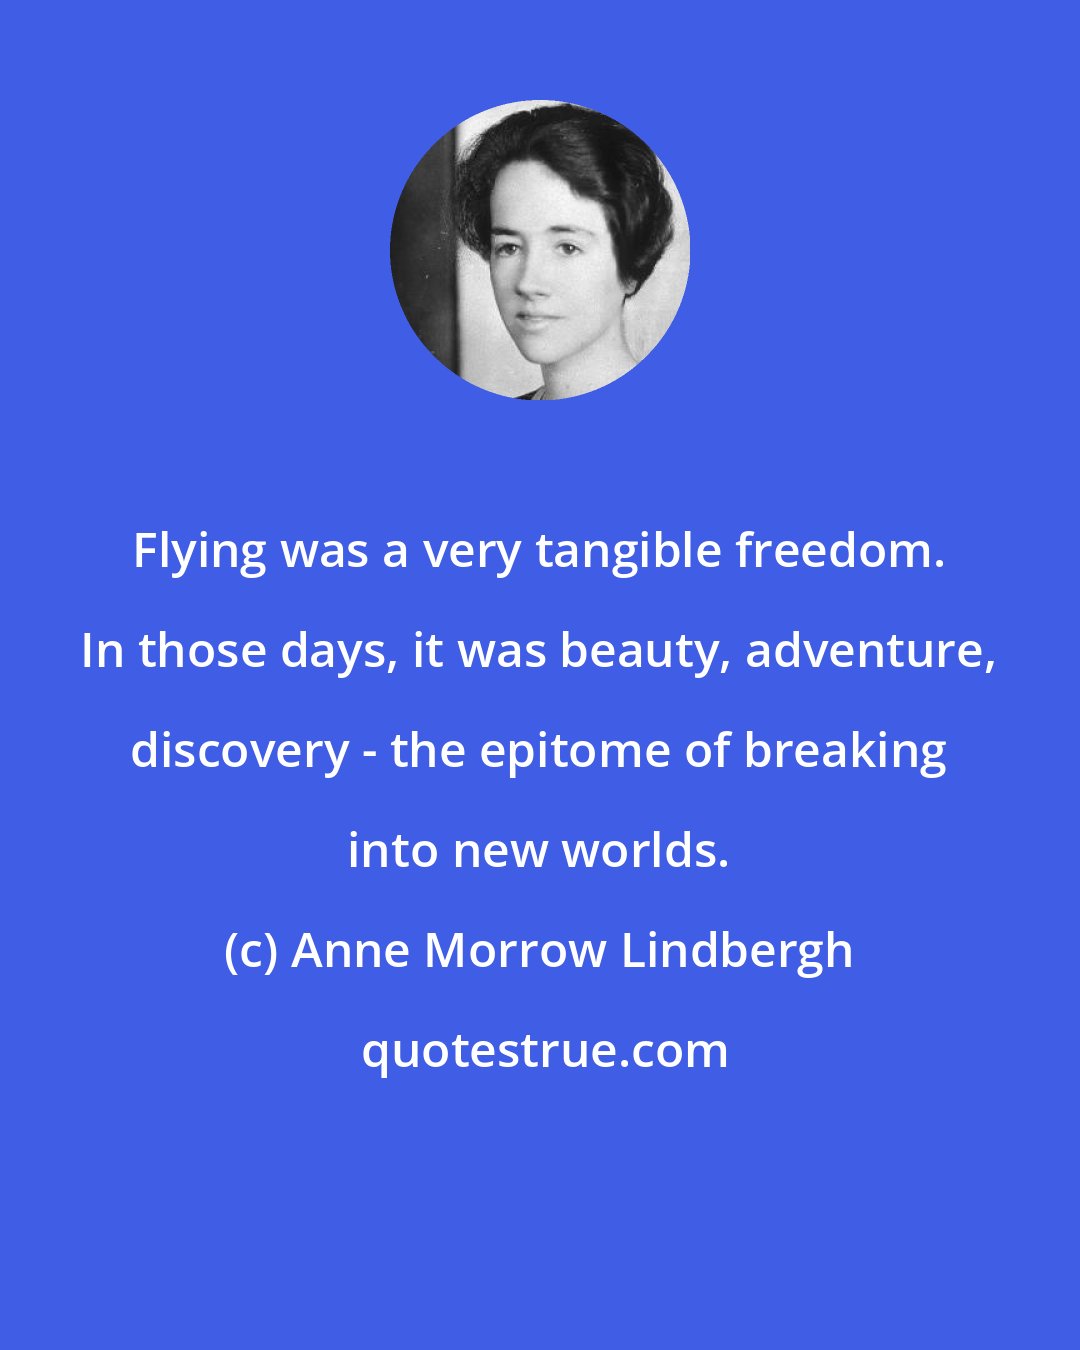 Anne Morrow Lindbergh: Flying was a very tangible freedom. In those days, it was beauty, adventure, discovery - the epitome of breaking into new worlds.